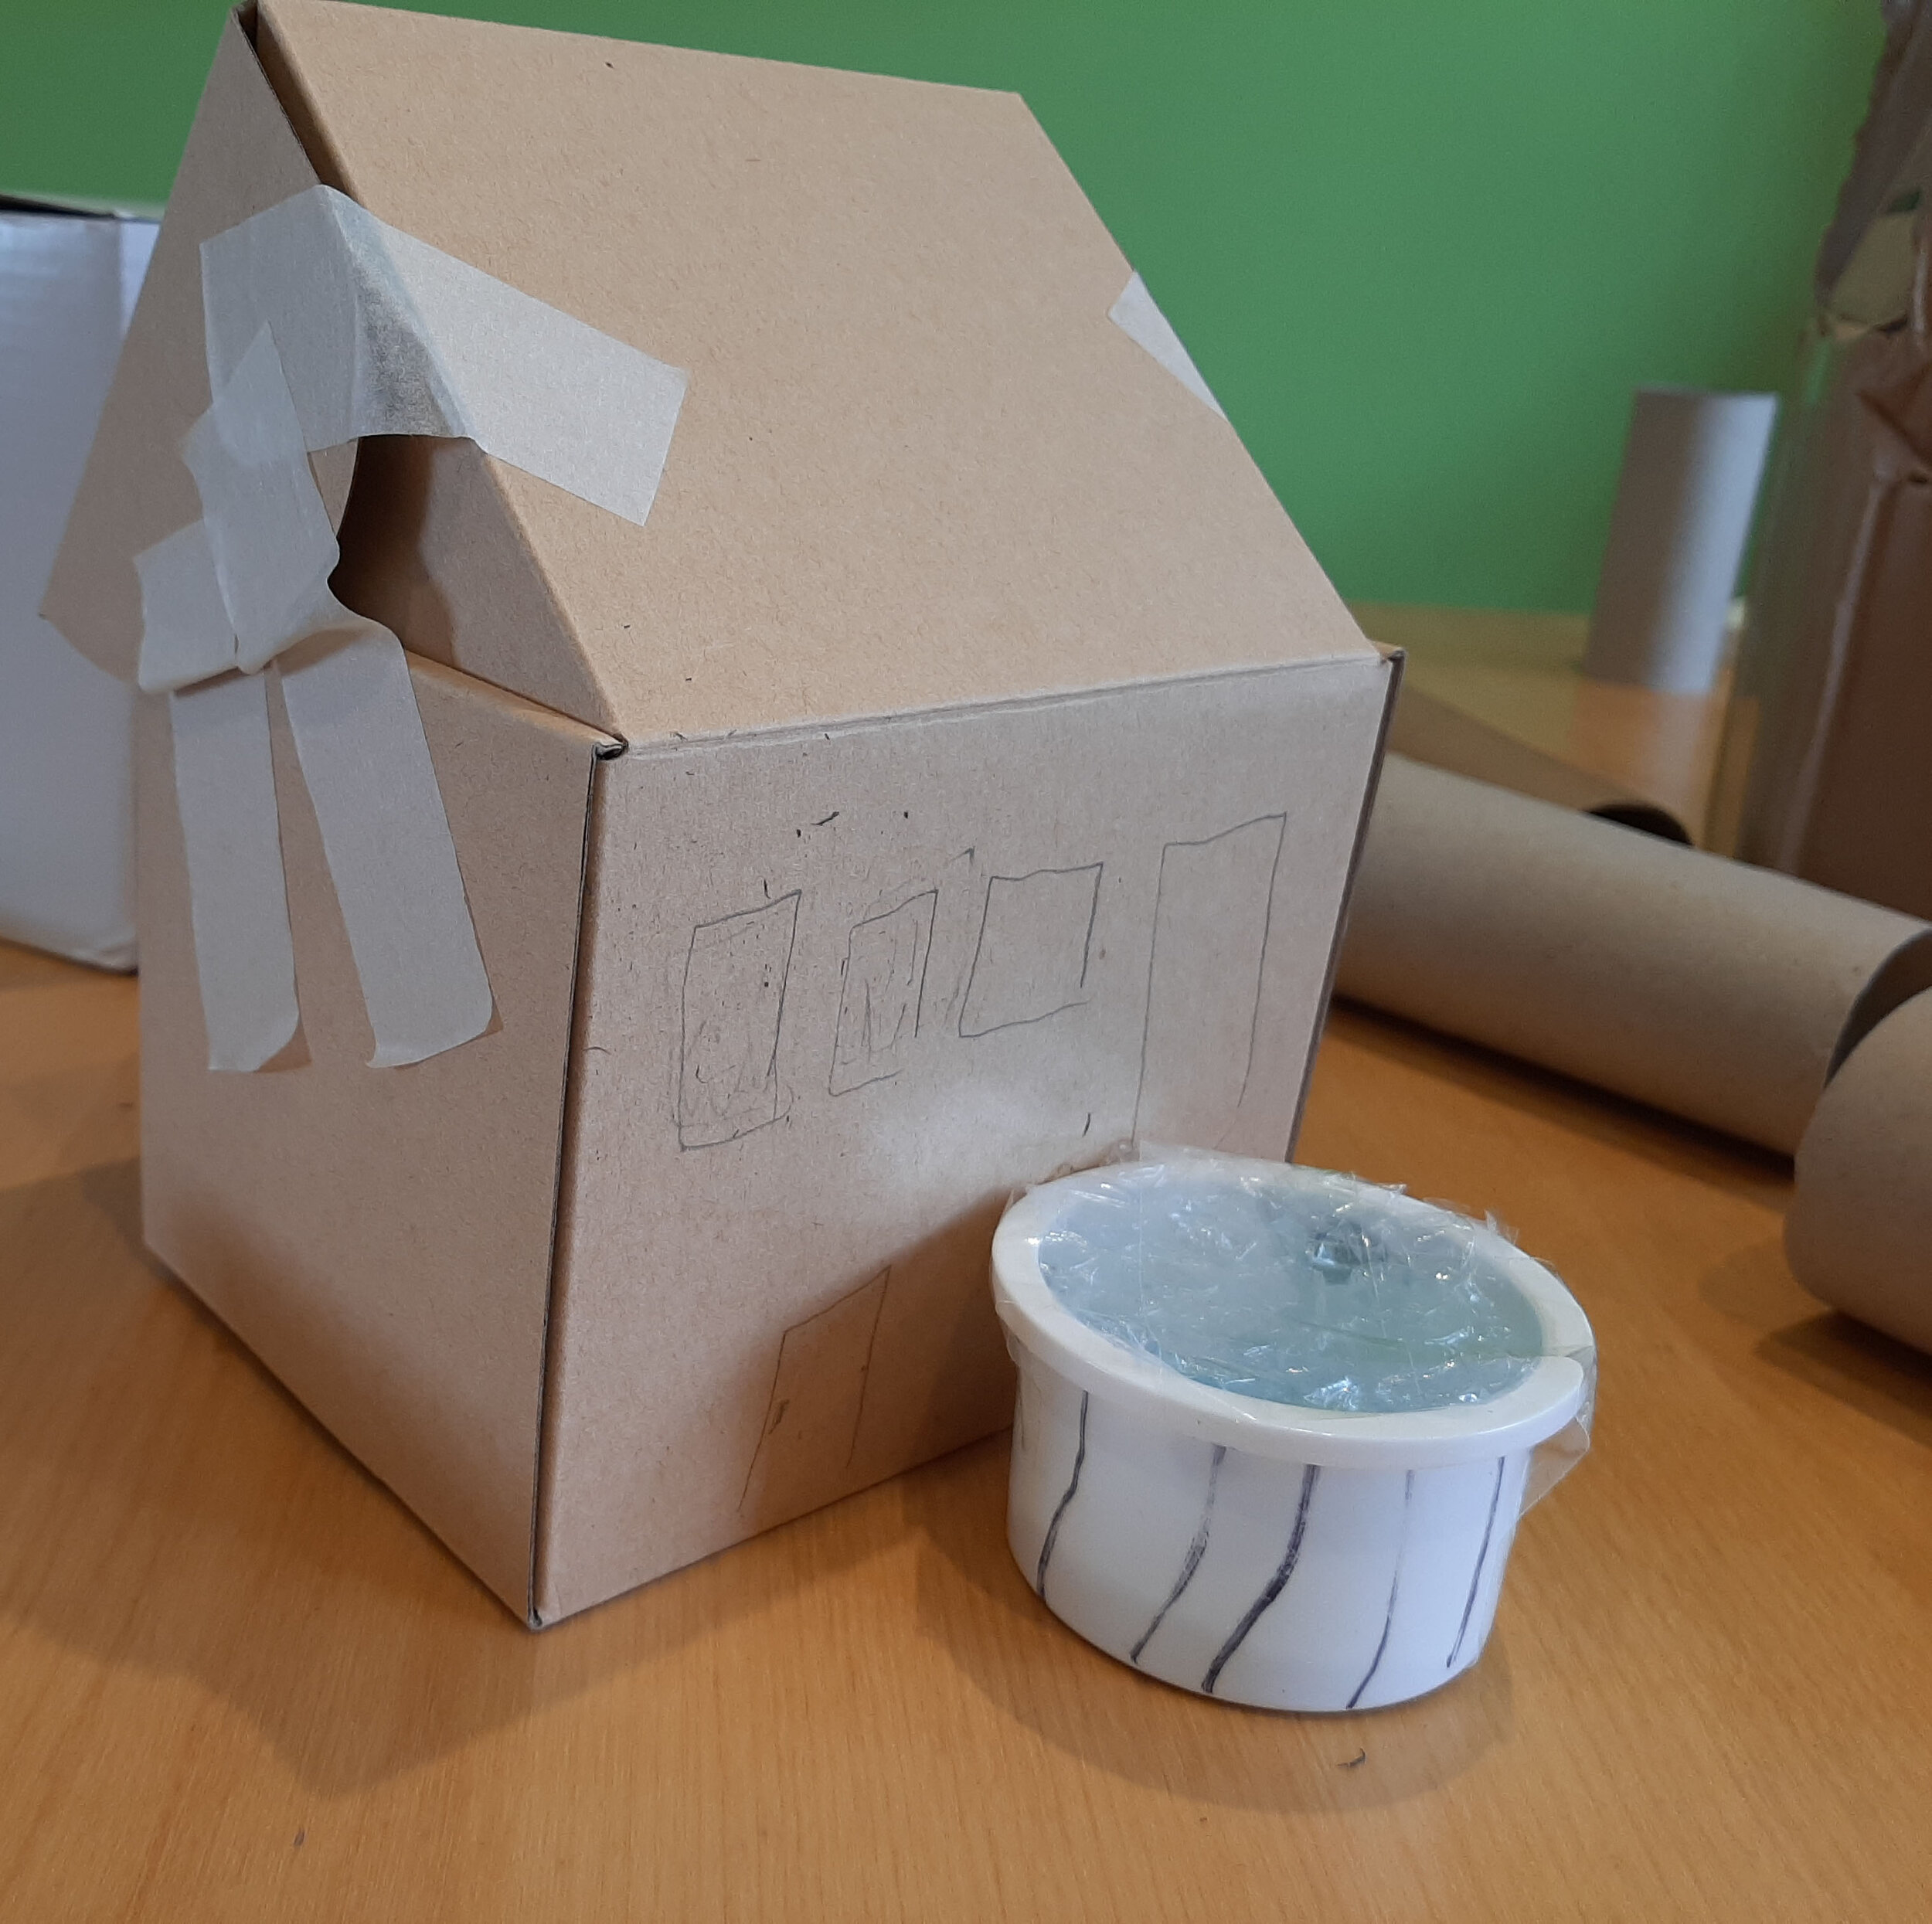 The Magnificent House by Aiden Shearer age 9